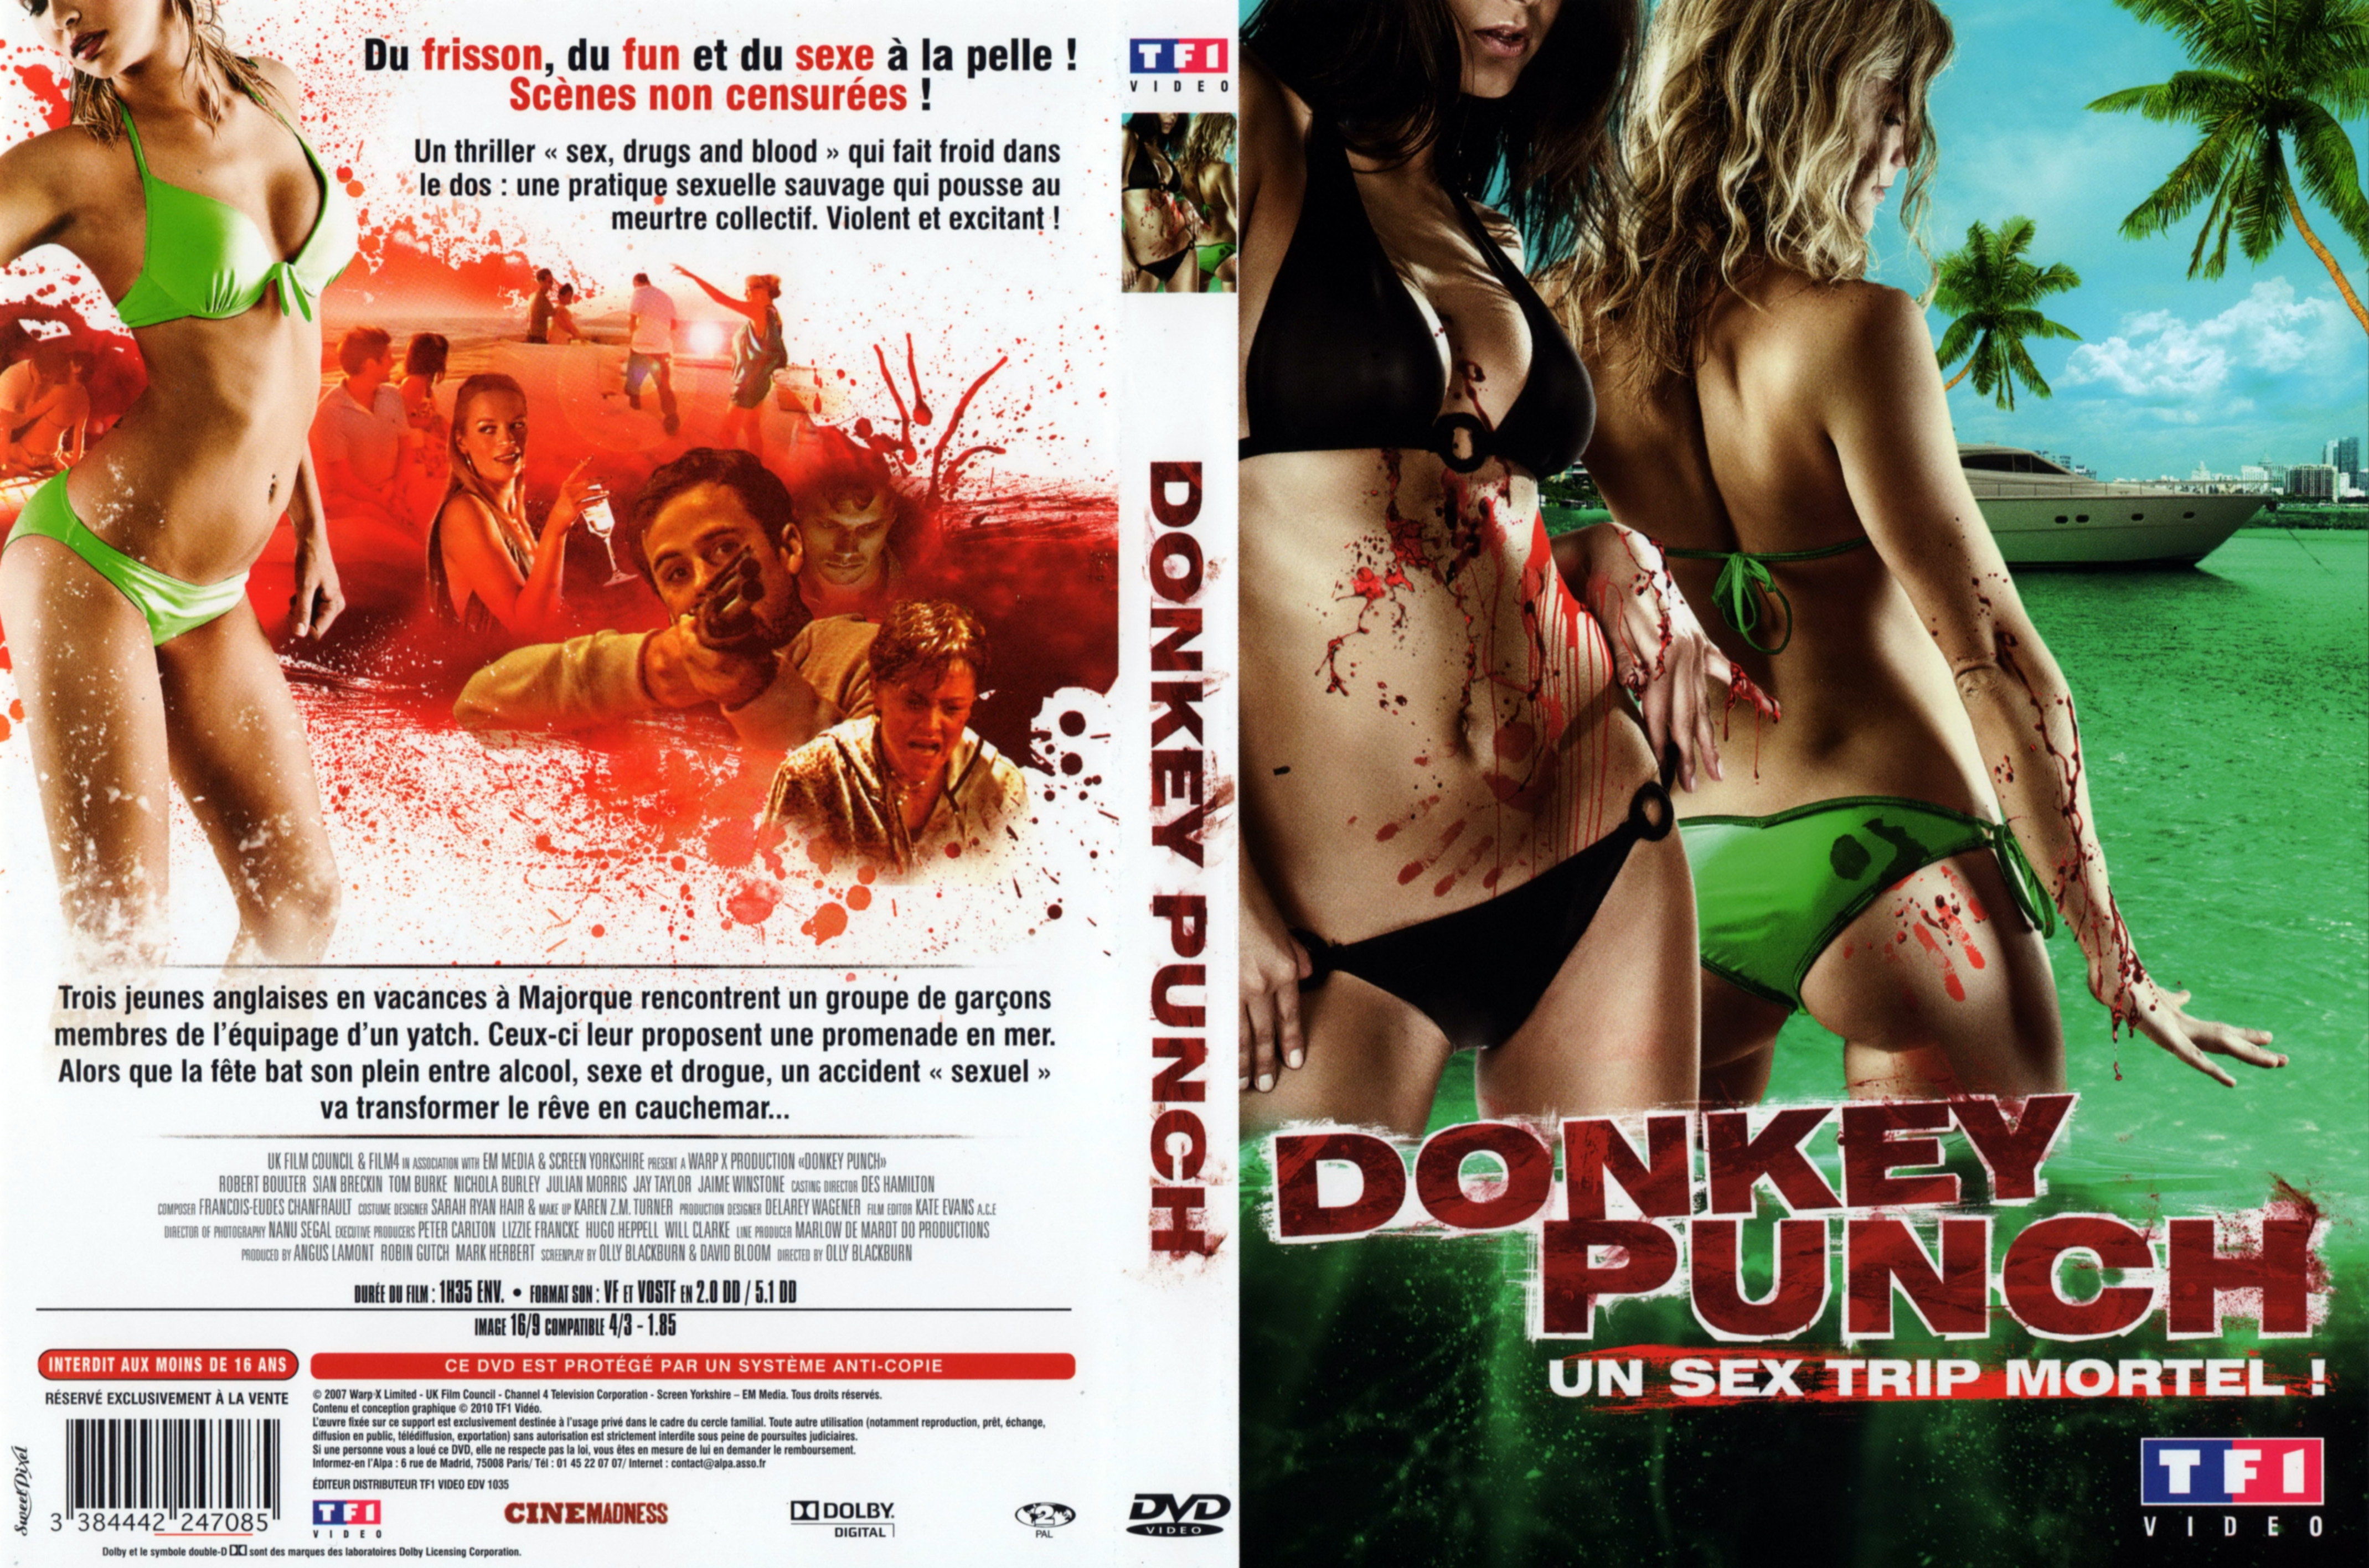 Jaquette DVD Donkey punch